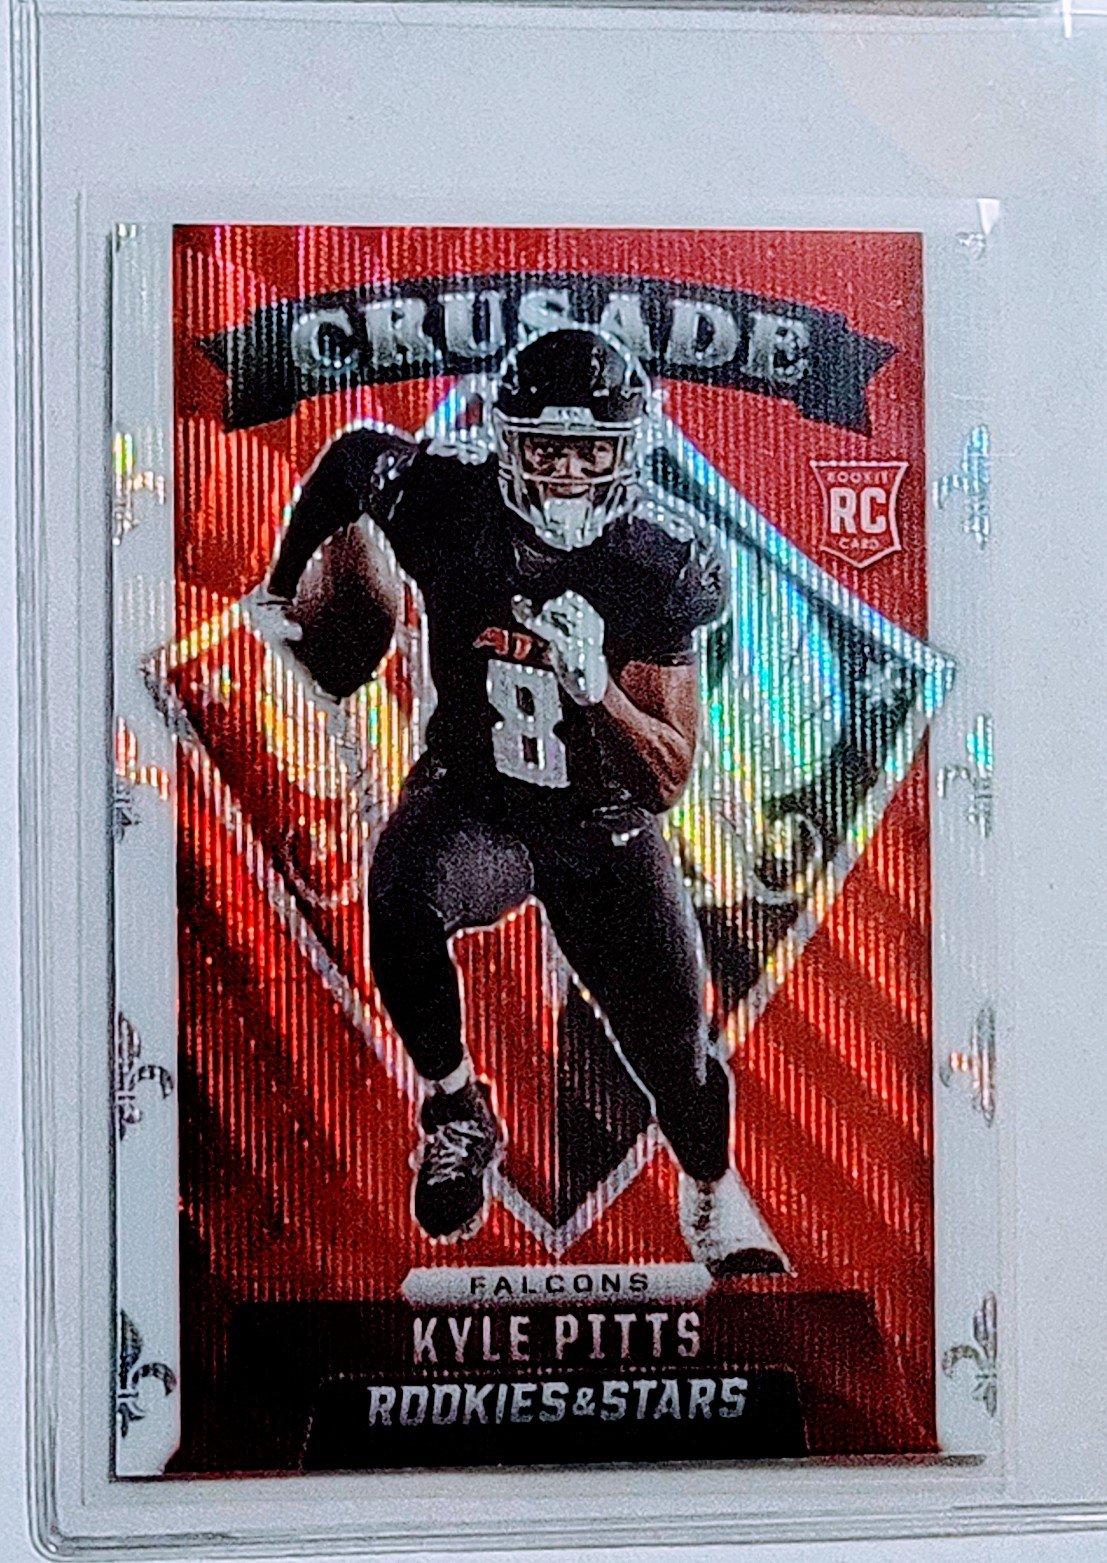 2021 Panini Rookies and Stars Kyle Pitts Star Studded Insert Rookie Red Wave Refractor Football Card AVM1 simple Xclusive Collectibles   